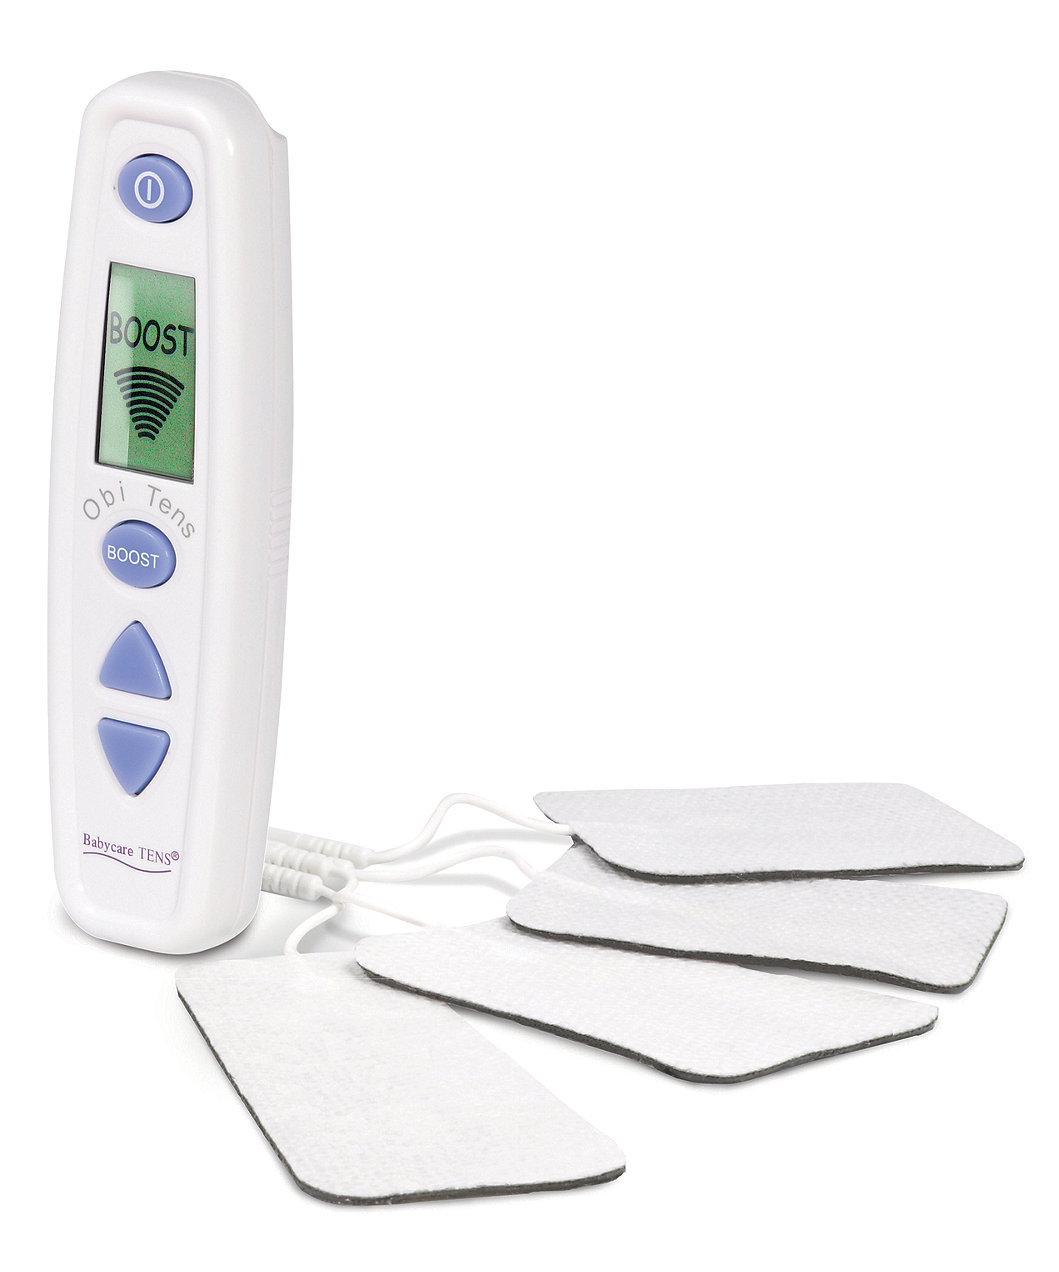 TENS unit rental with electrode pads attached